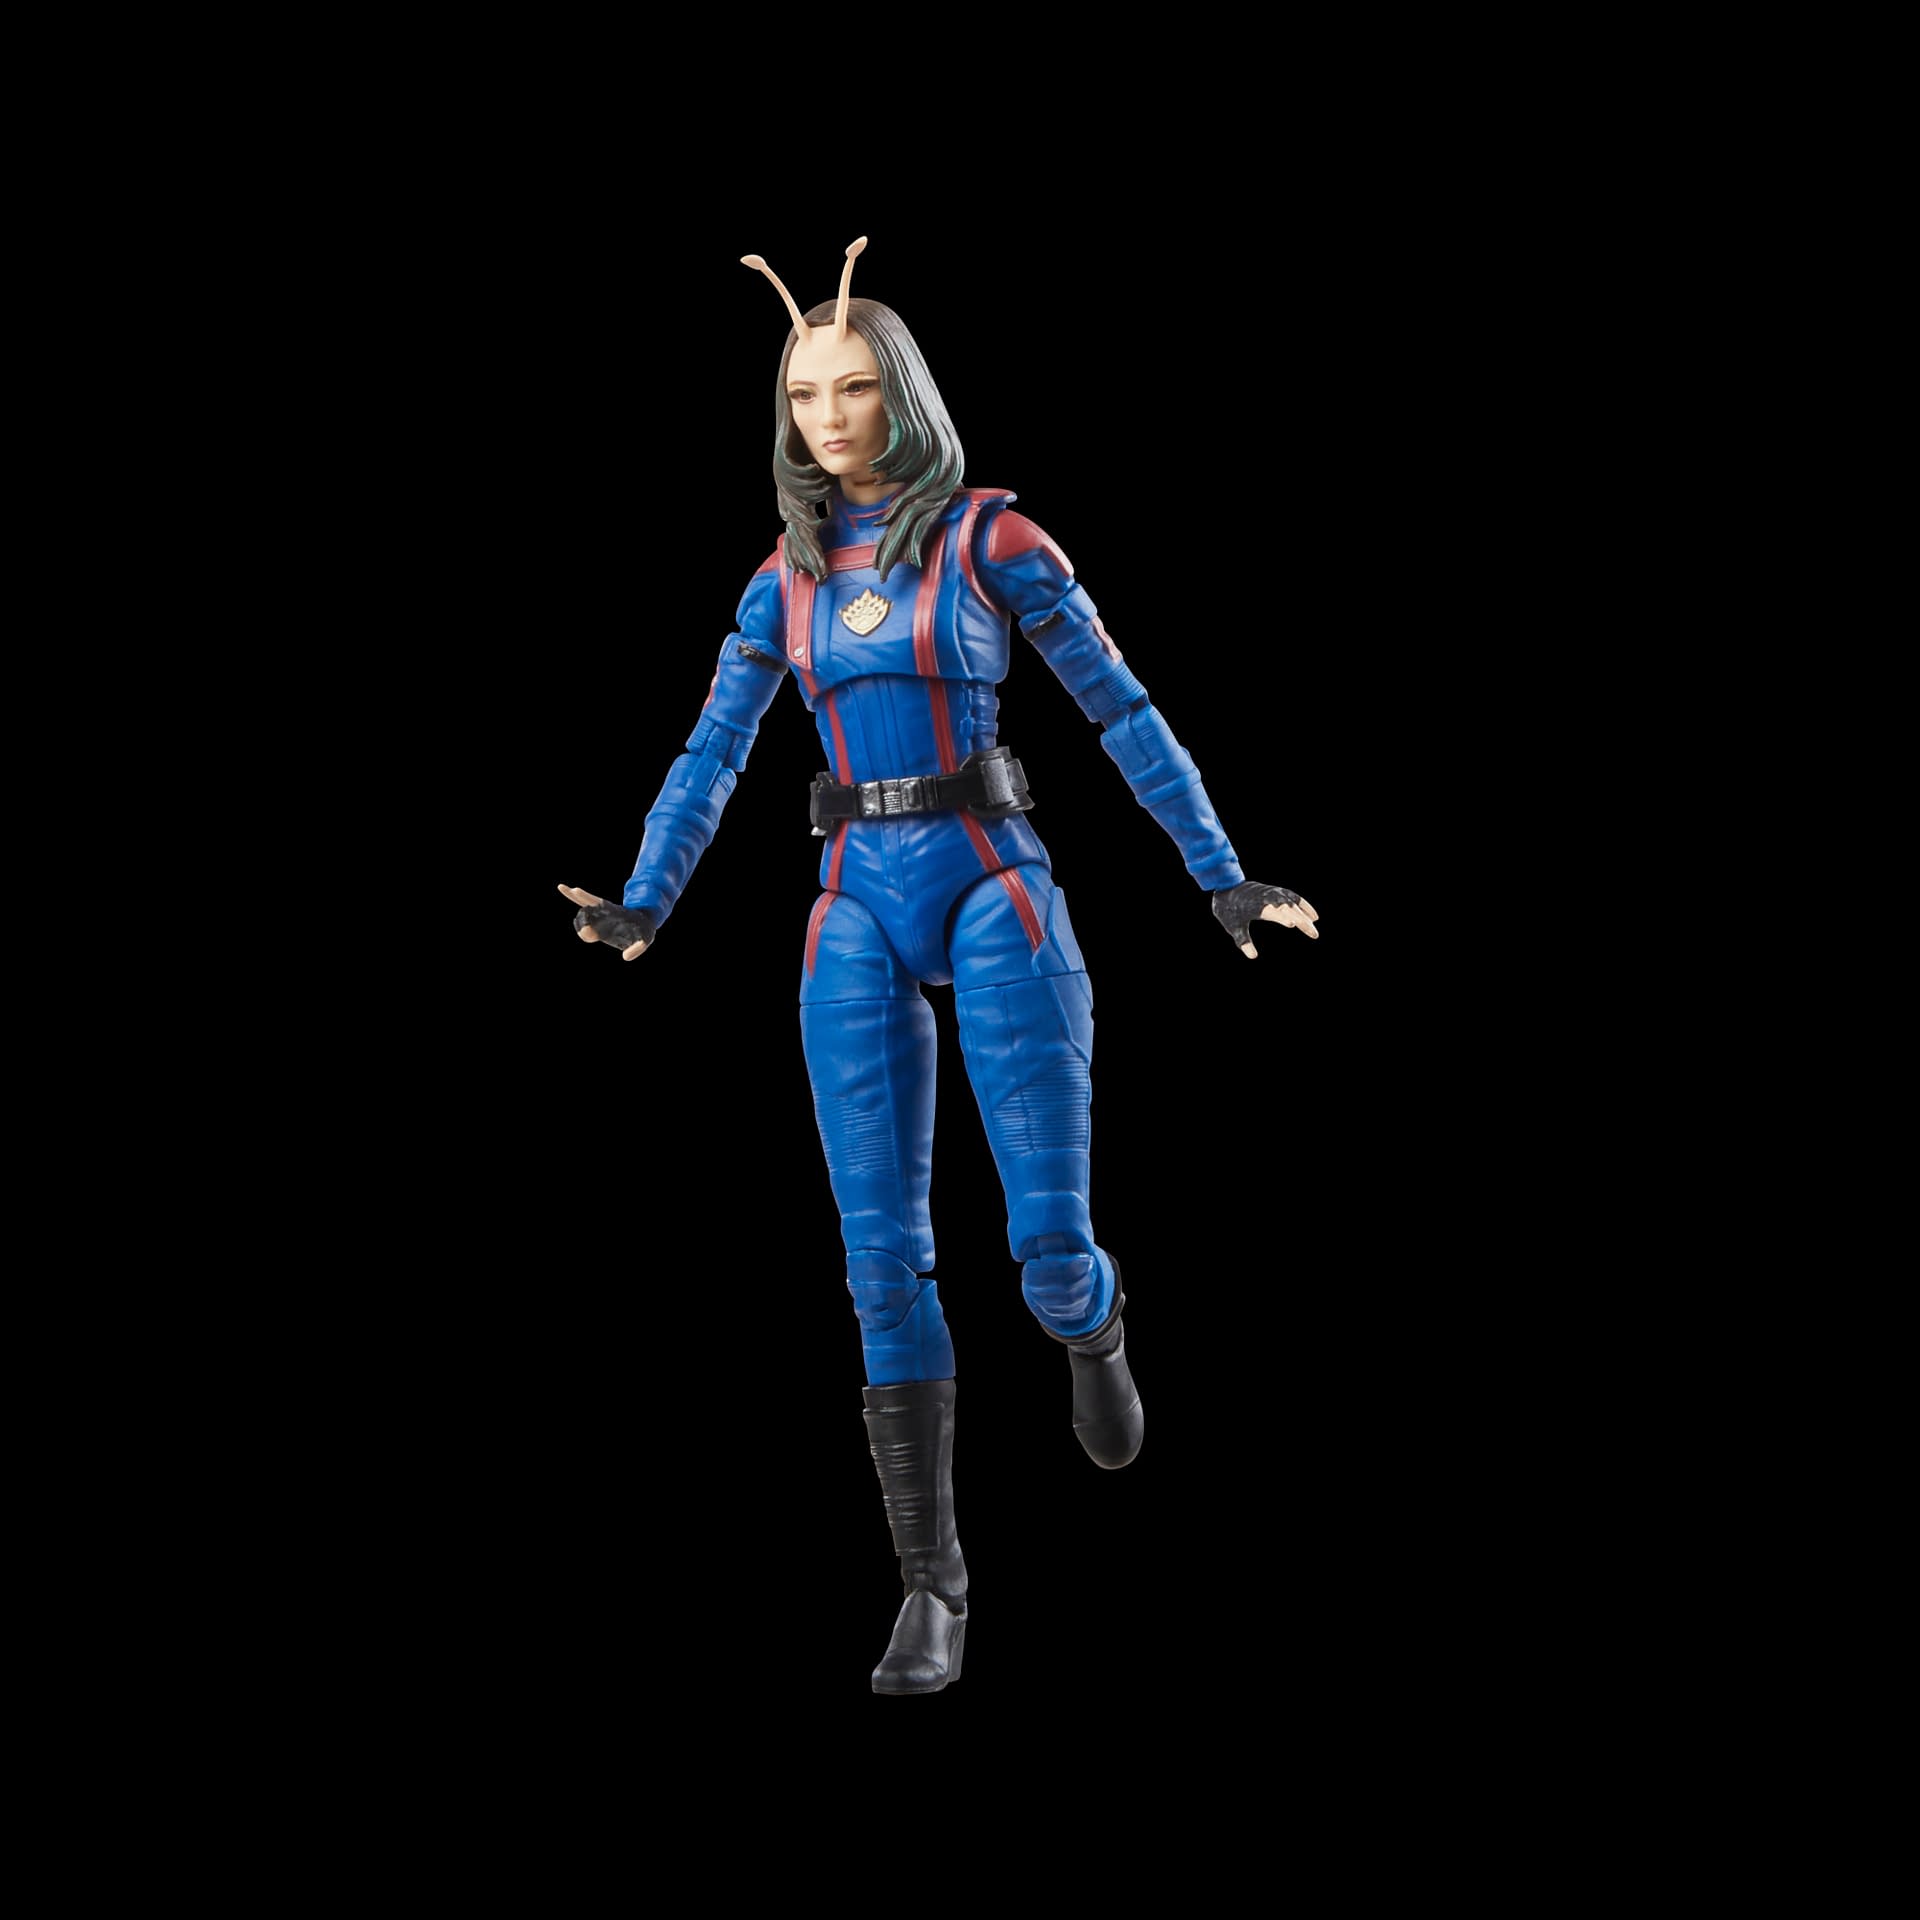 Guardians of the Galaxy Vol. 3 Mantis Figure Coming Soon from Hasbro 